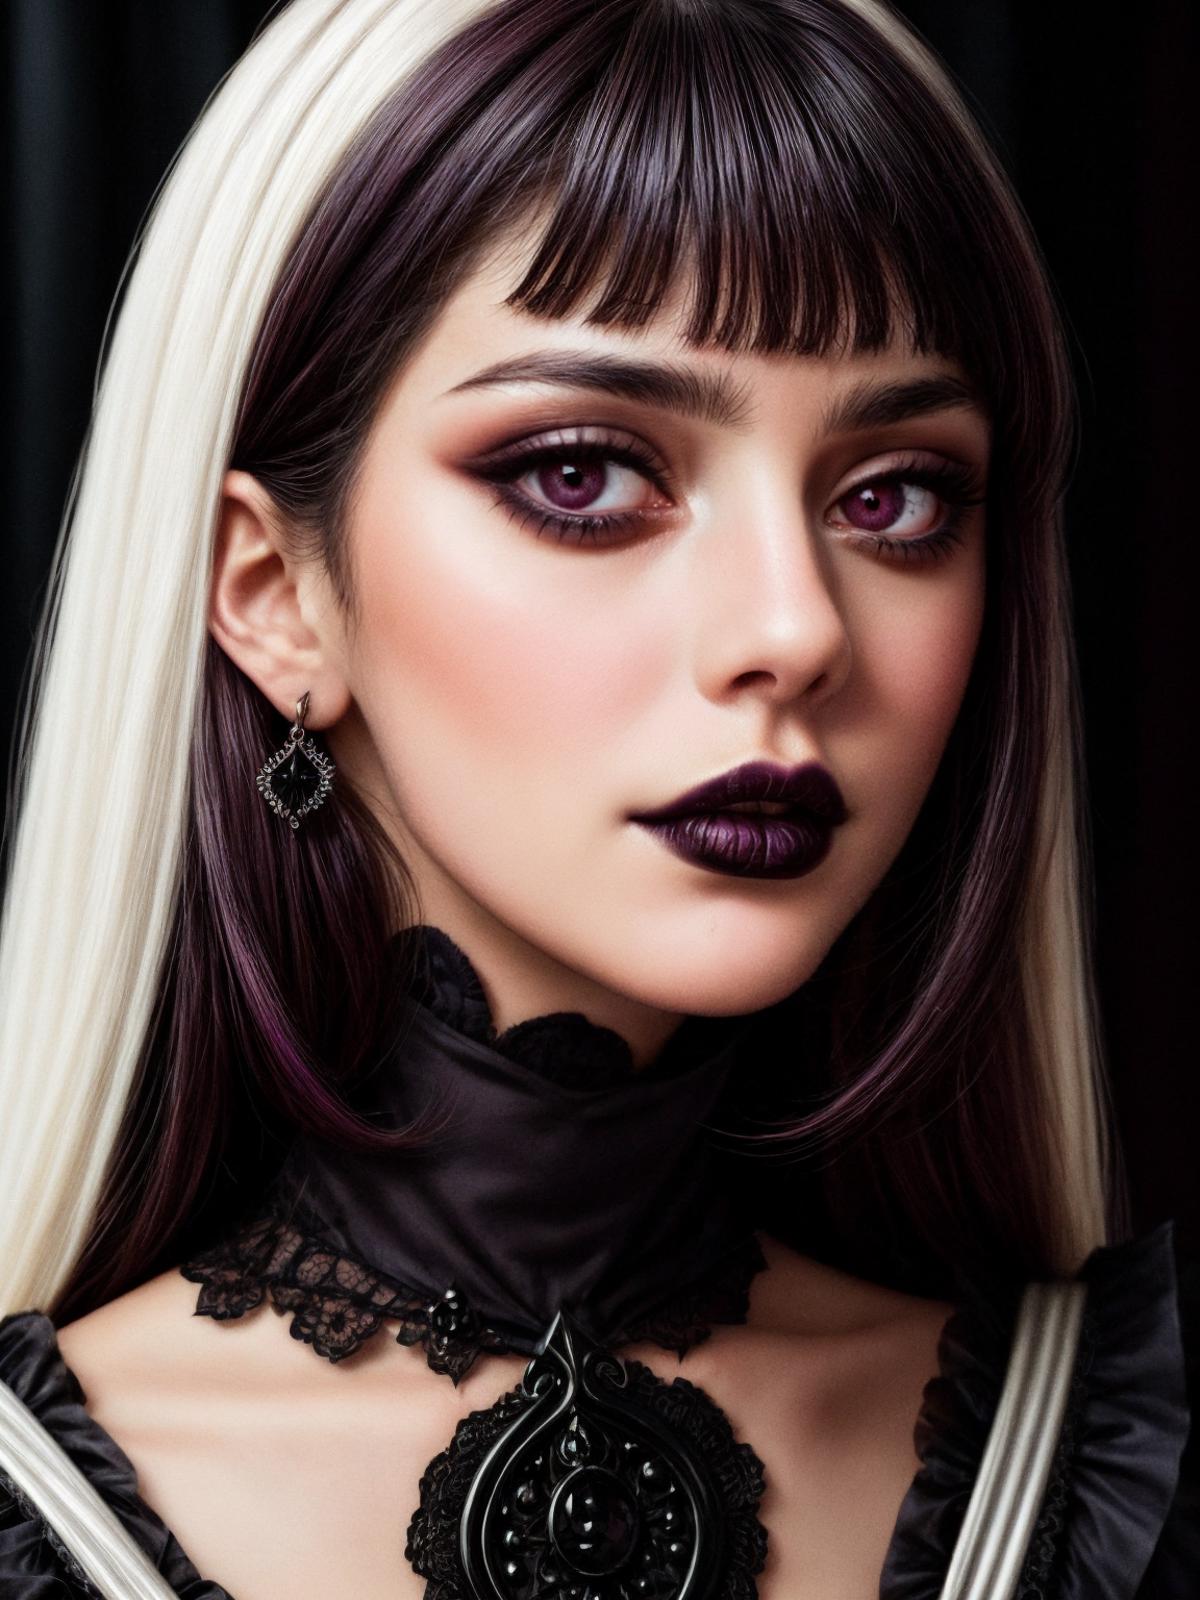 A woman with purple hair, black lipstick, and a black lace choker necklace.